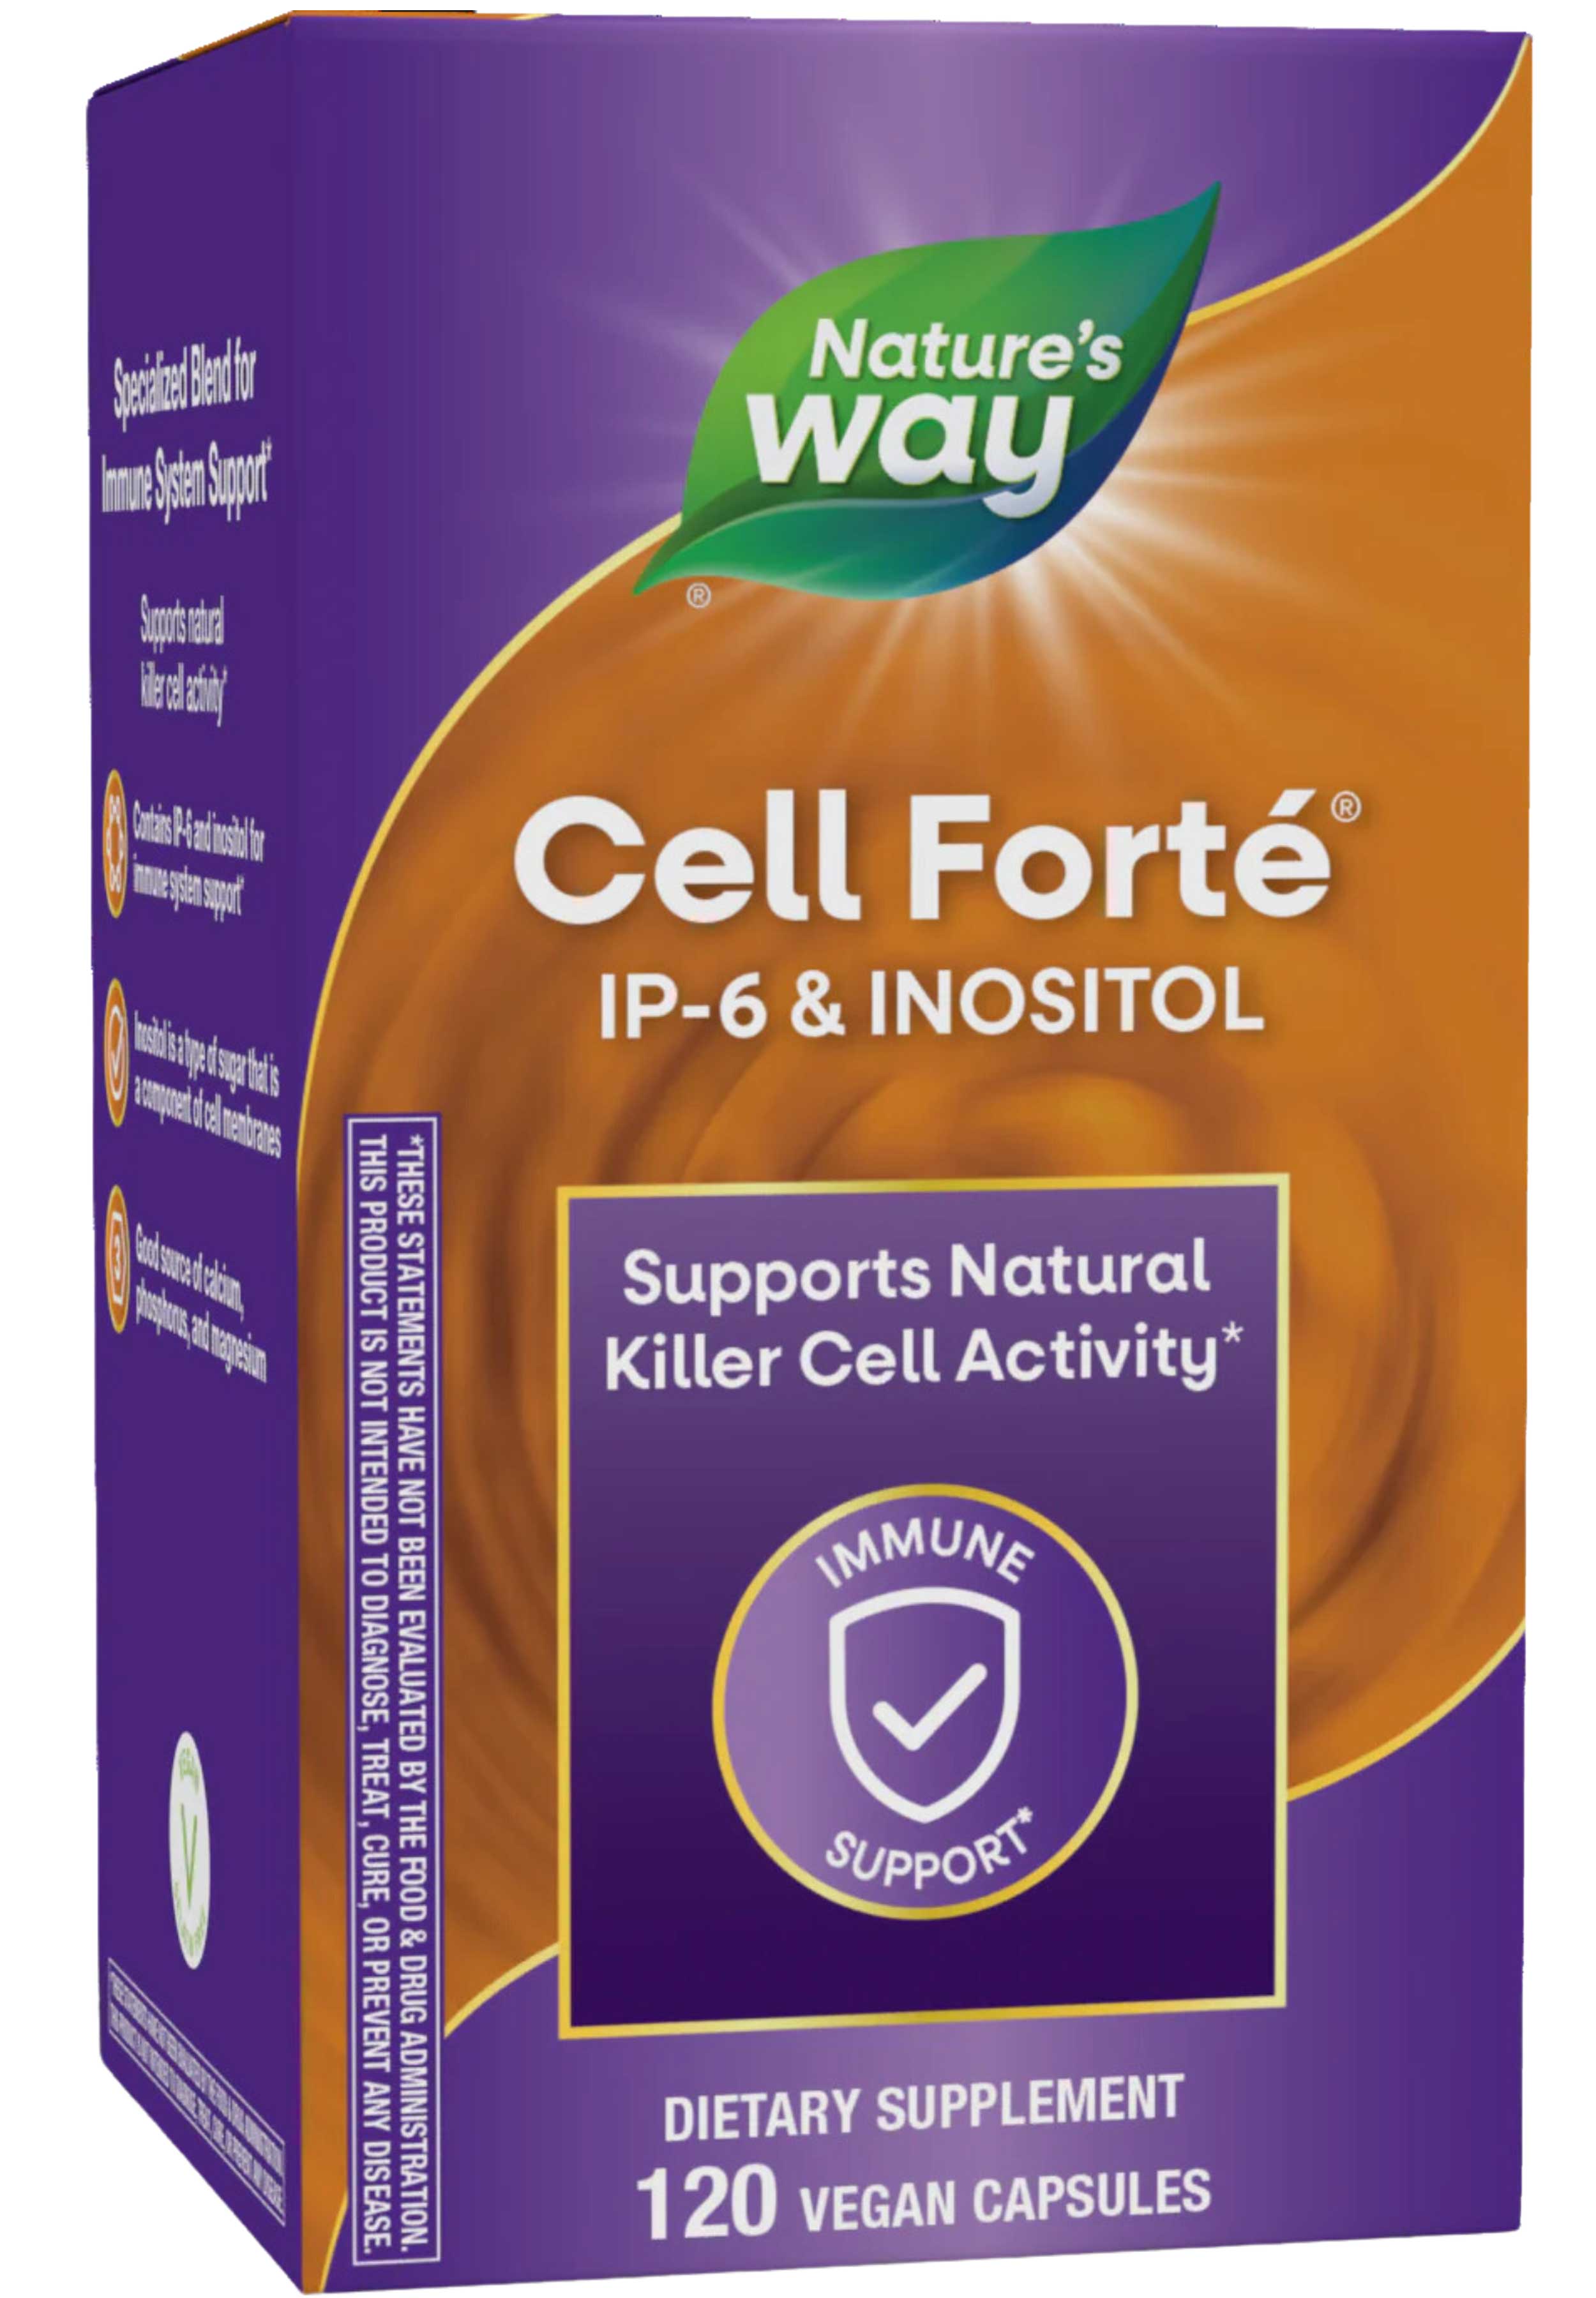 Nature's Way Cell Forté IP-6 & Inositol (Formerly Enzymatic Therapy Cell Forté IP-6 & Inositol)